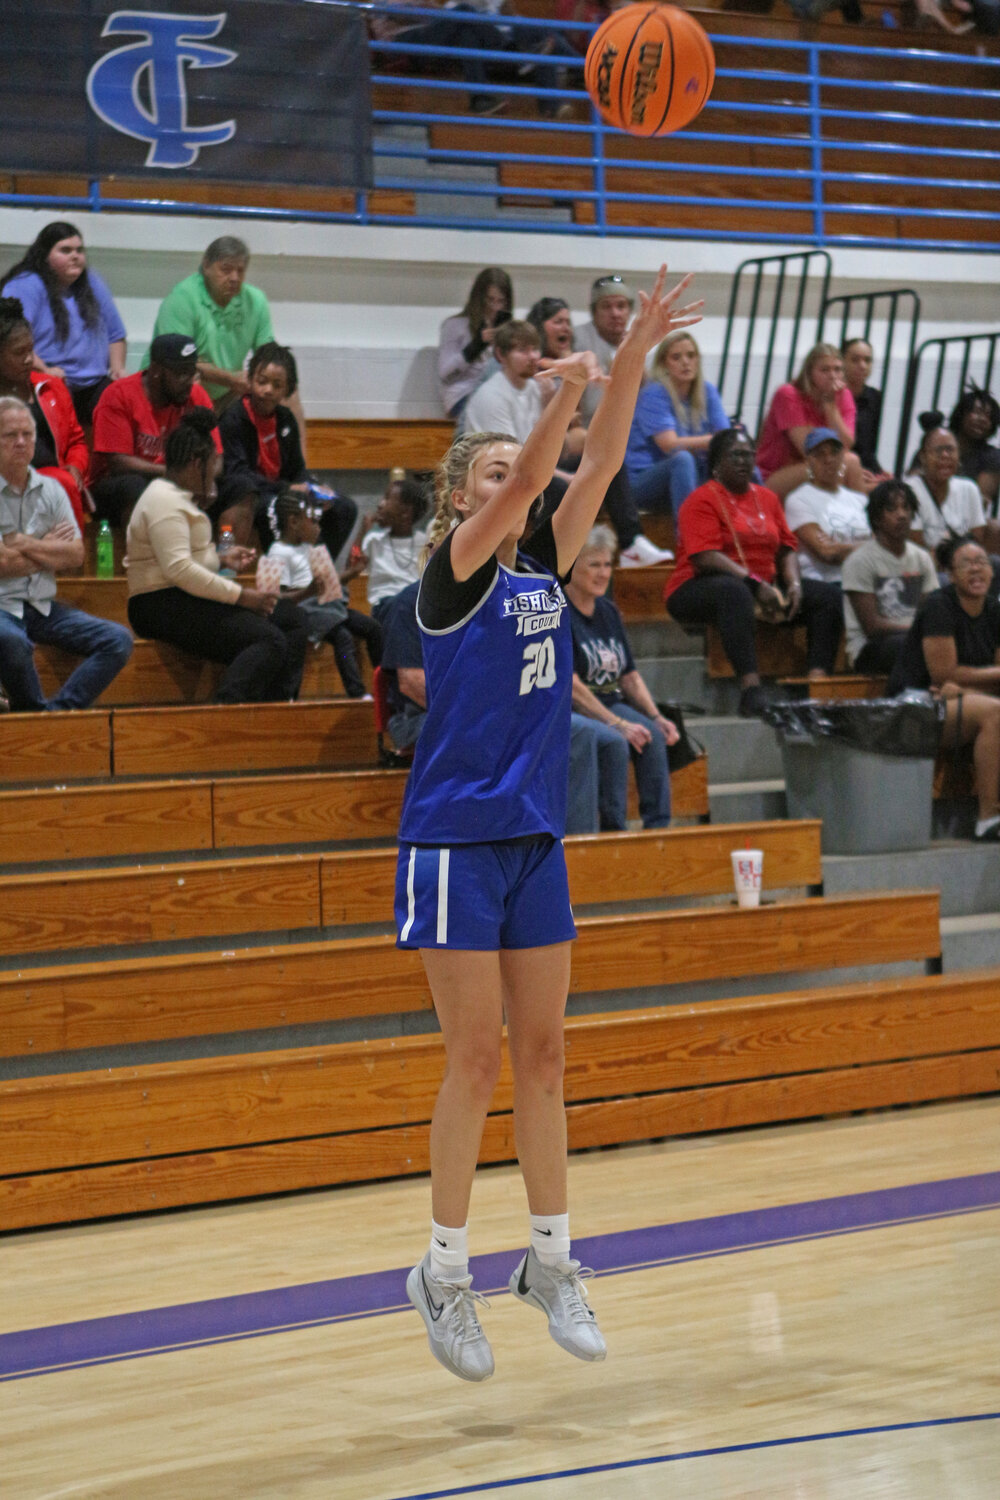 Baylon Middleton putting up, 1 of her several, 3-pointers against Corinth.